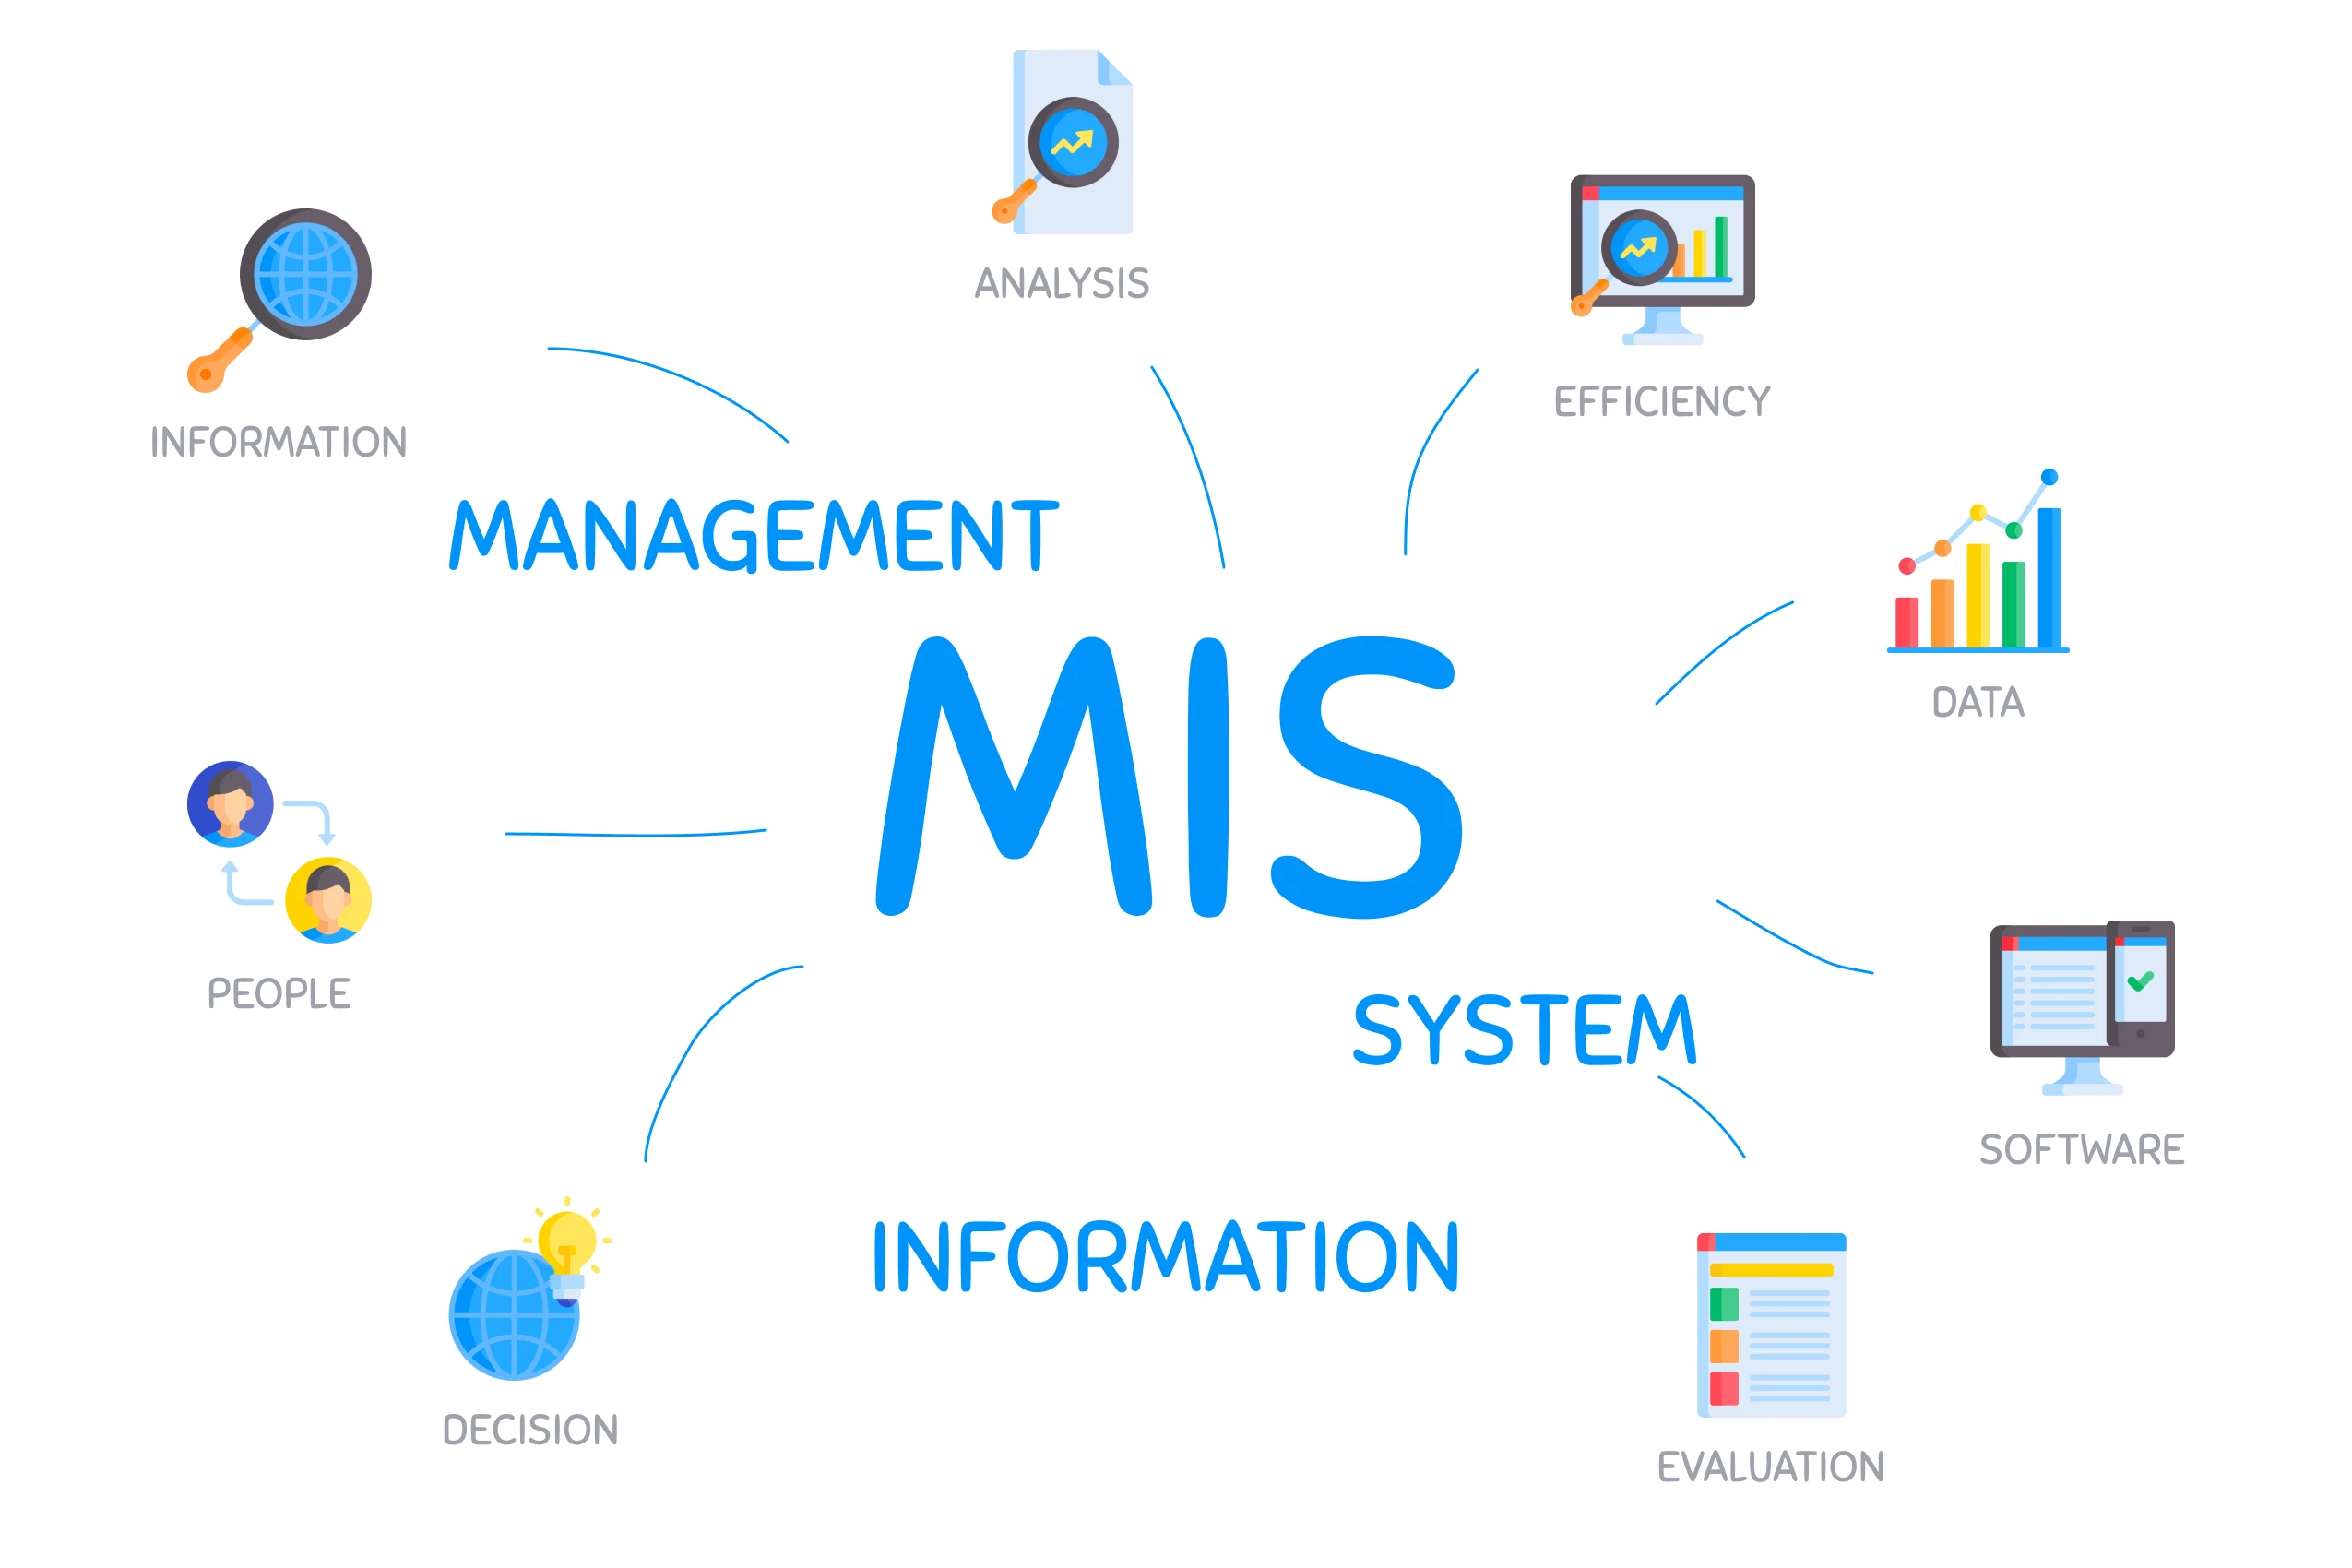 Management Information Systems (MIS) Definition - What is Management Information Systems (MIS)